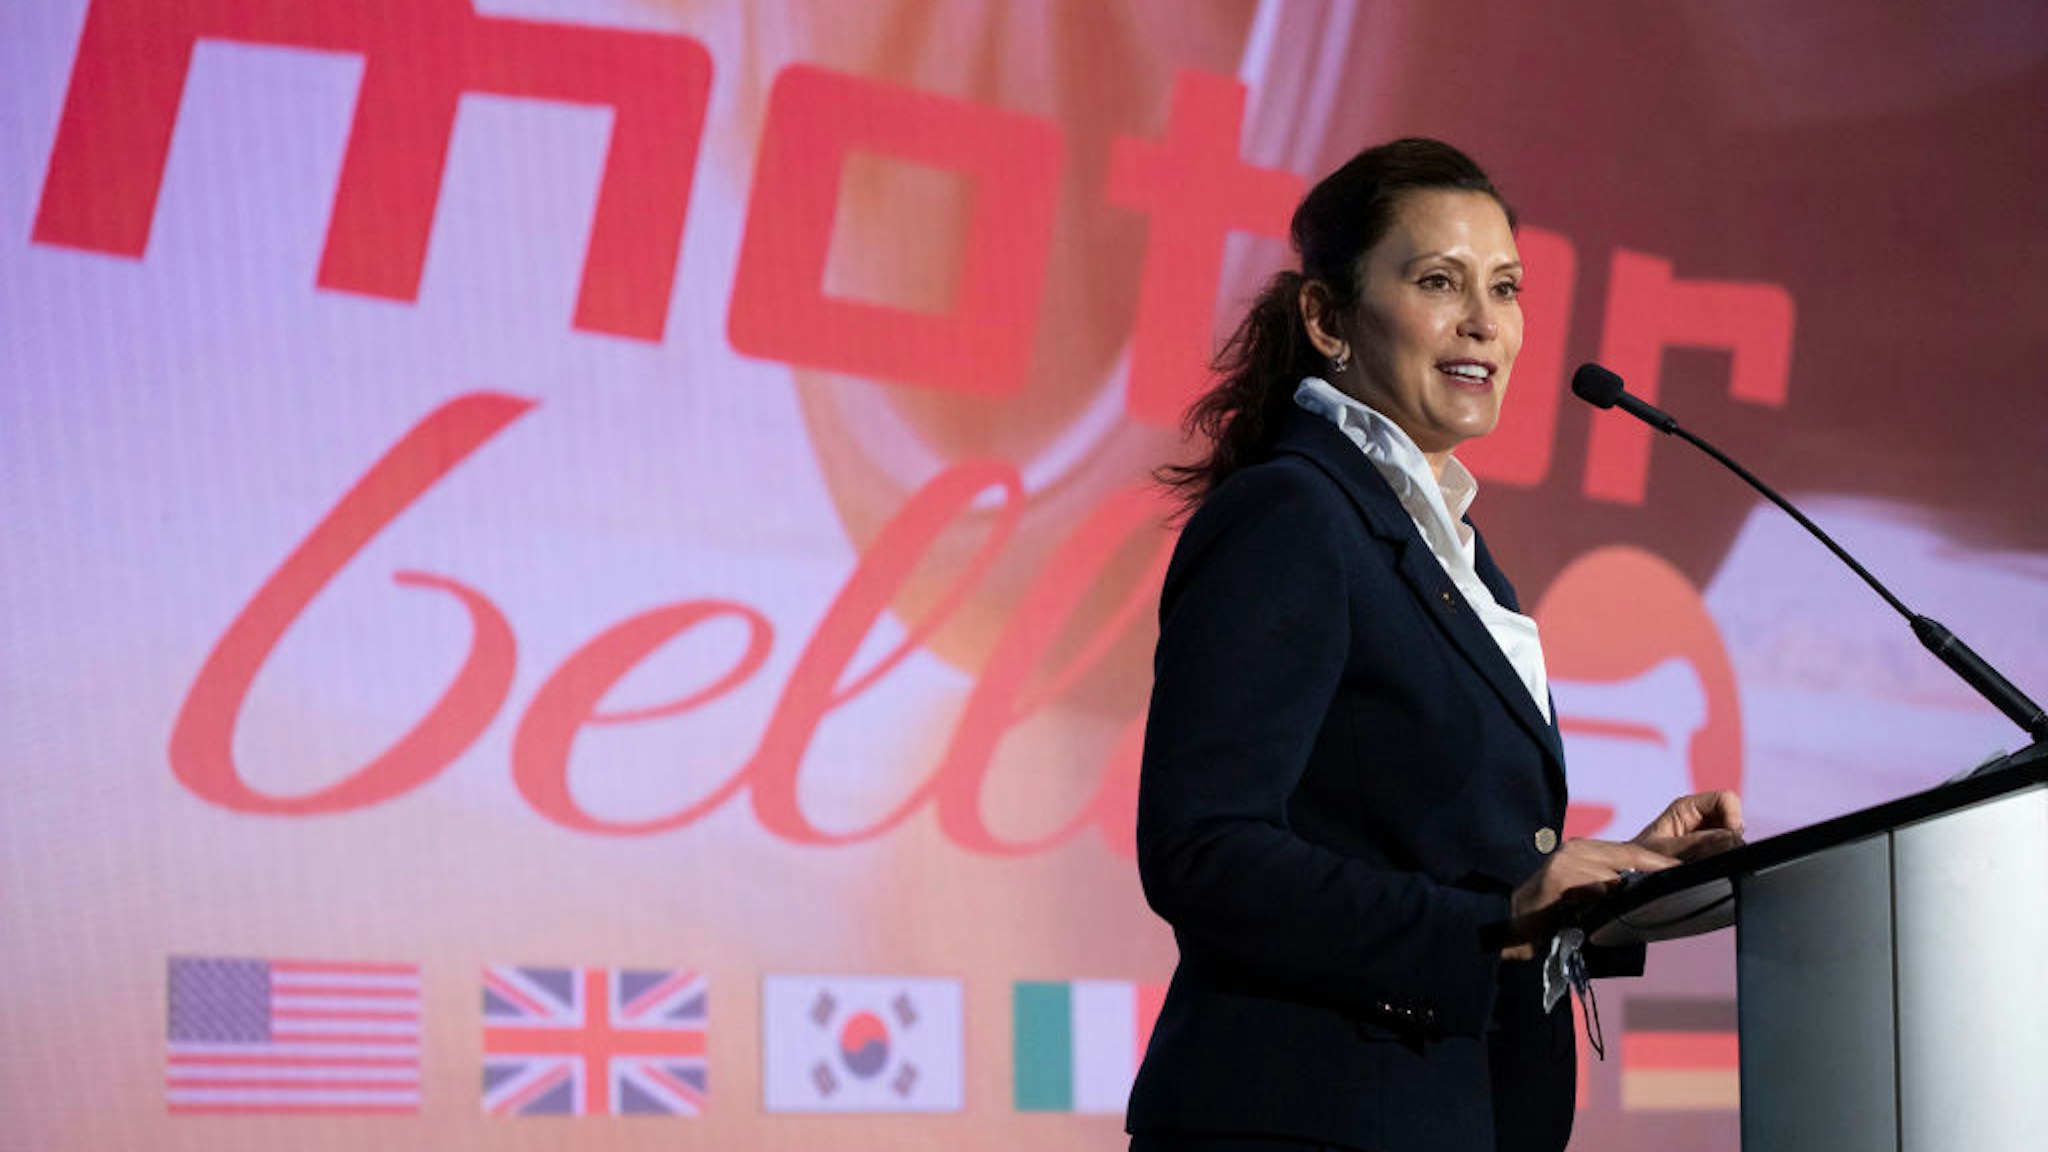 Michigan Governor Gretchen Whitmer speaks at the start of the 2021 Motor Bella auto show on September 21, 2021 in Pontiac, Michigan.